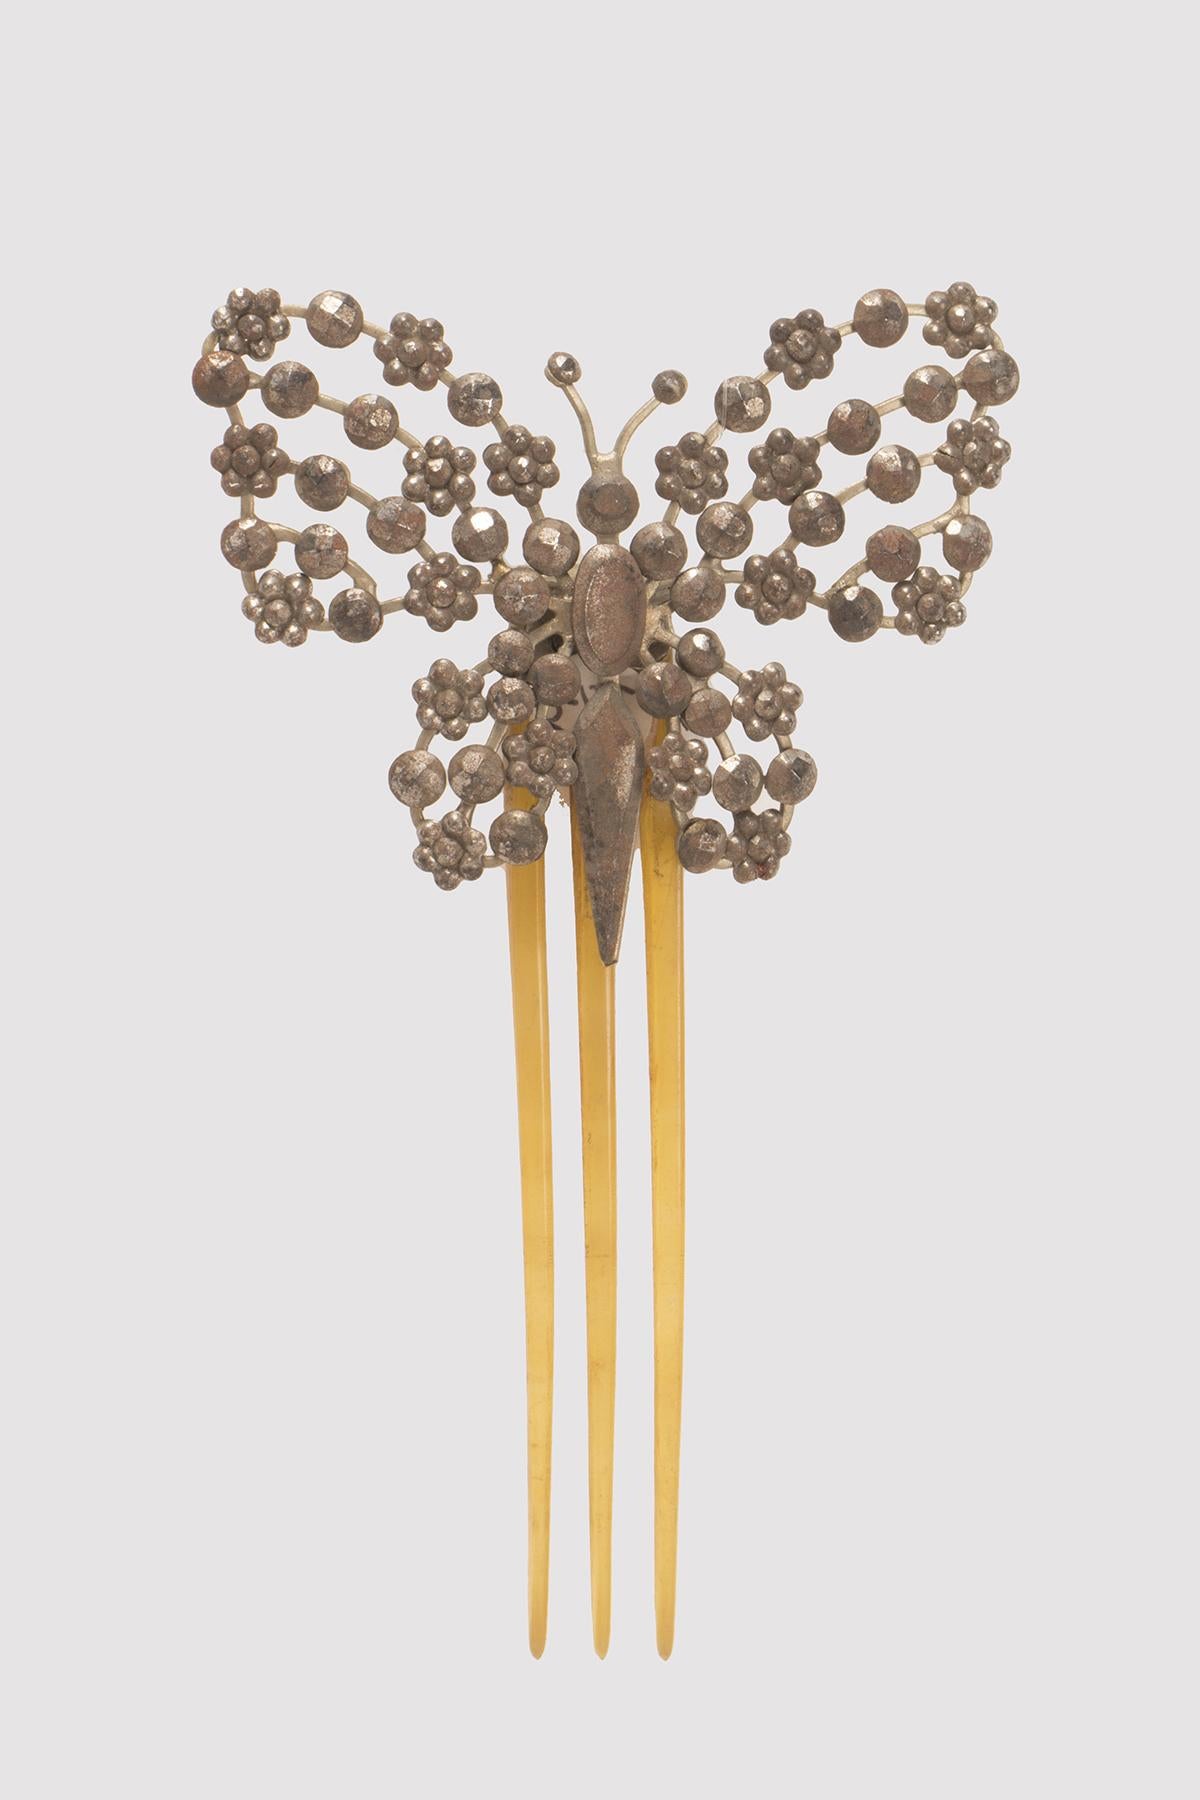 Hairdressing comb with blonde tortoiseshell prongs and cut steel decoration depicting a butterfly. France circa 1900. (SHIP TO EU ONLY)